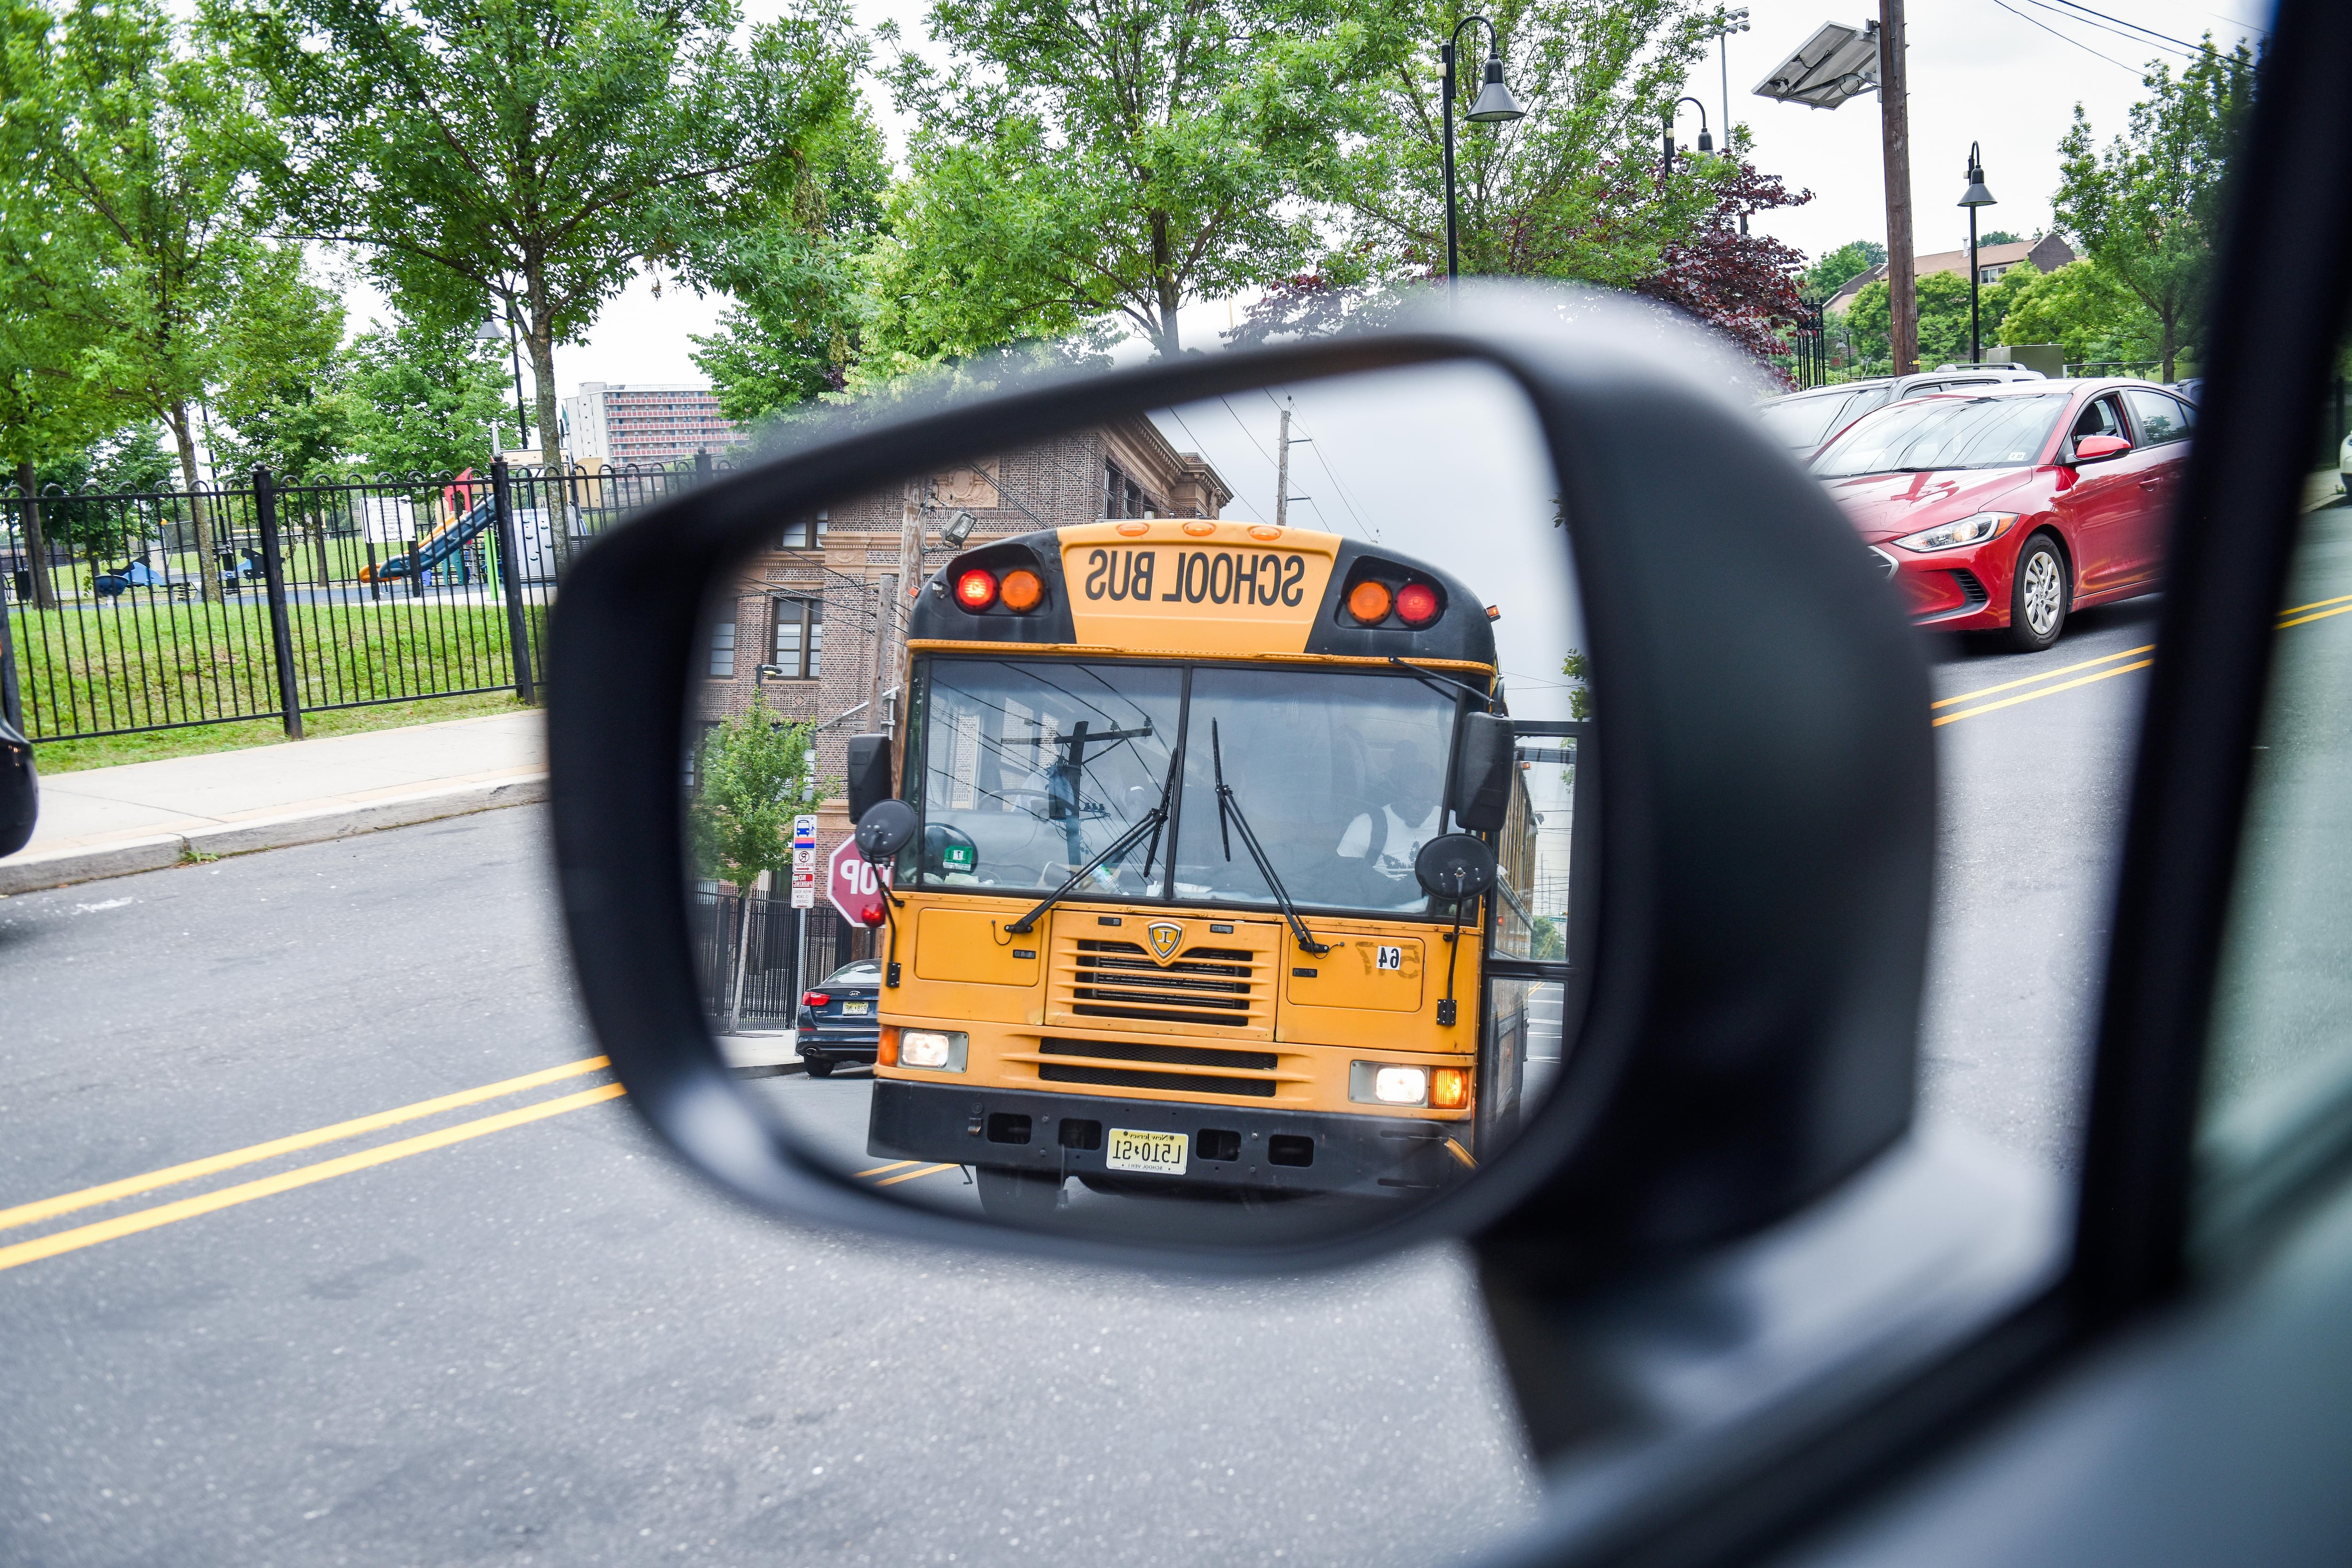 A yellow school bus is seen in the reflection of a car's sideview mirror.